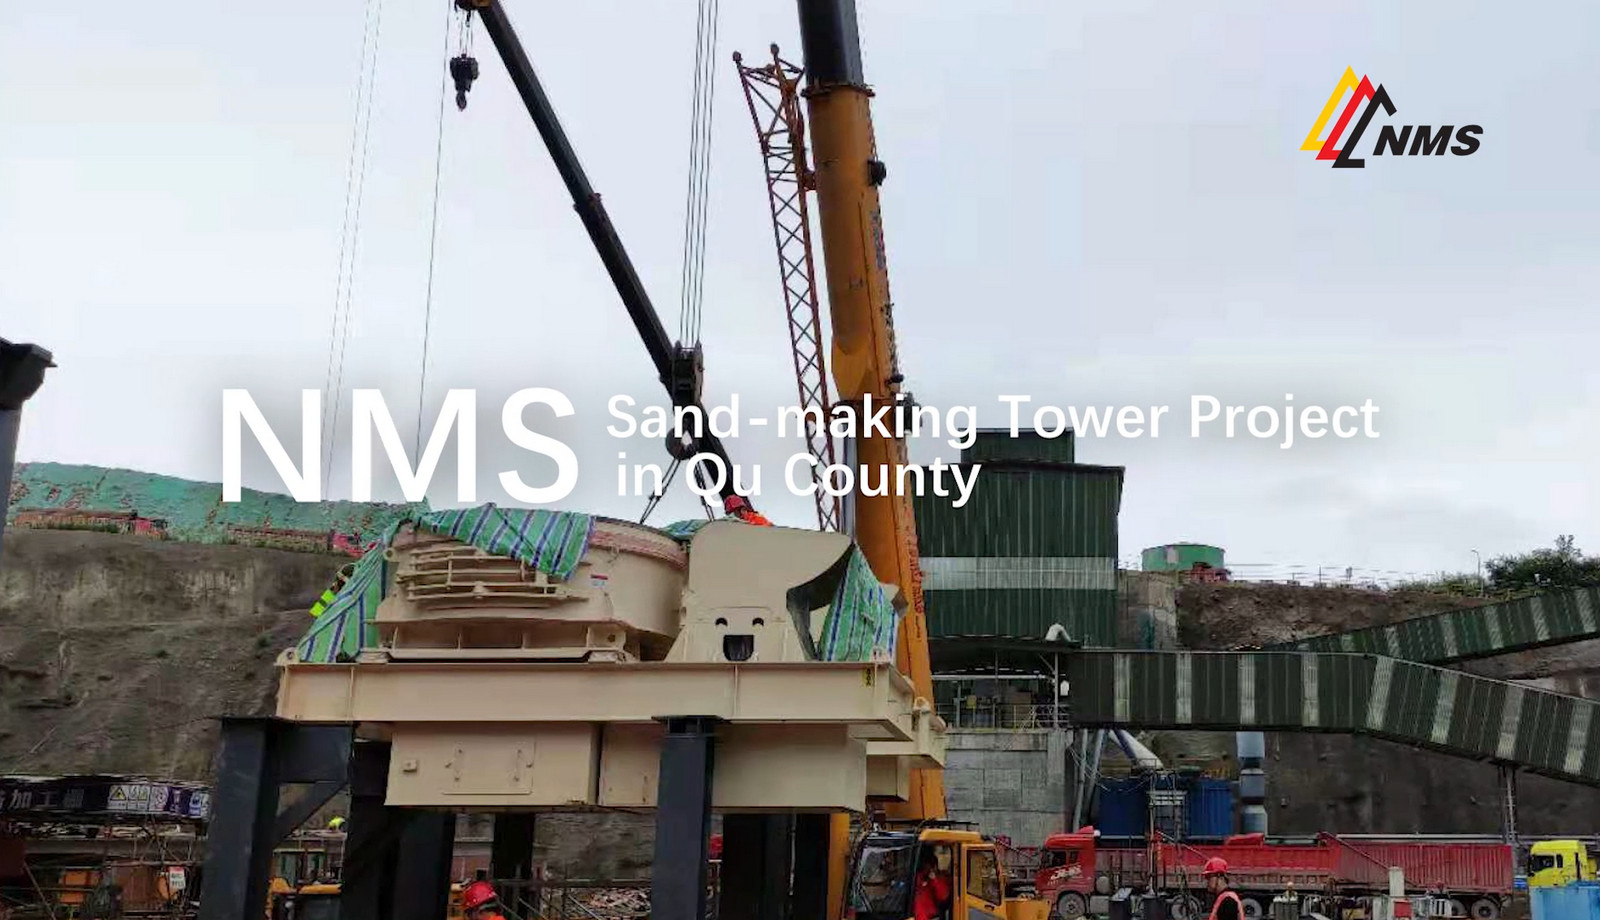 NMS Sand-making Tower Project in Qu County